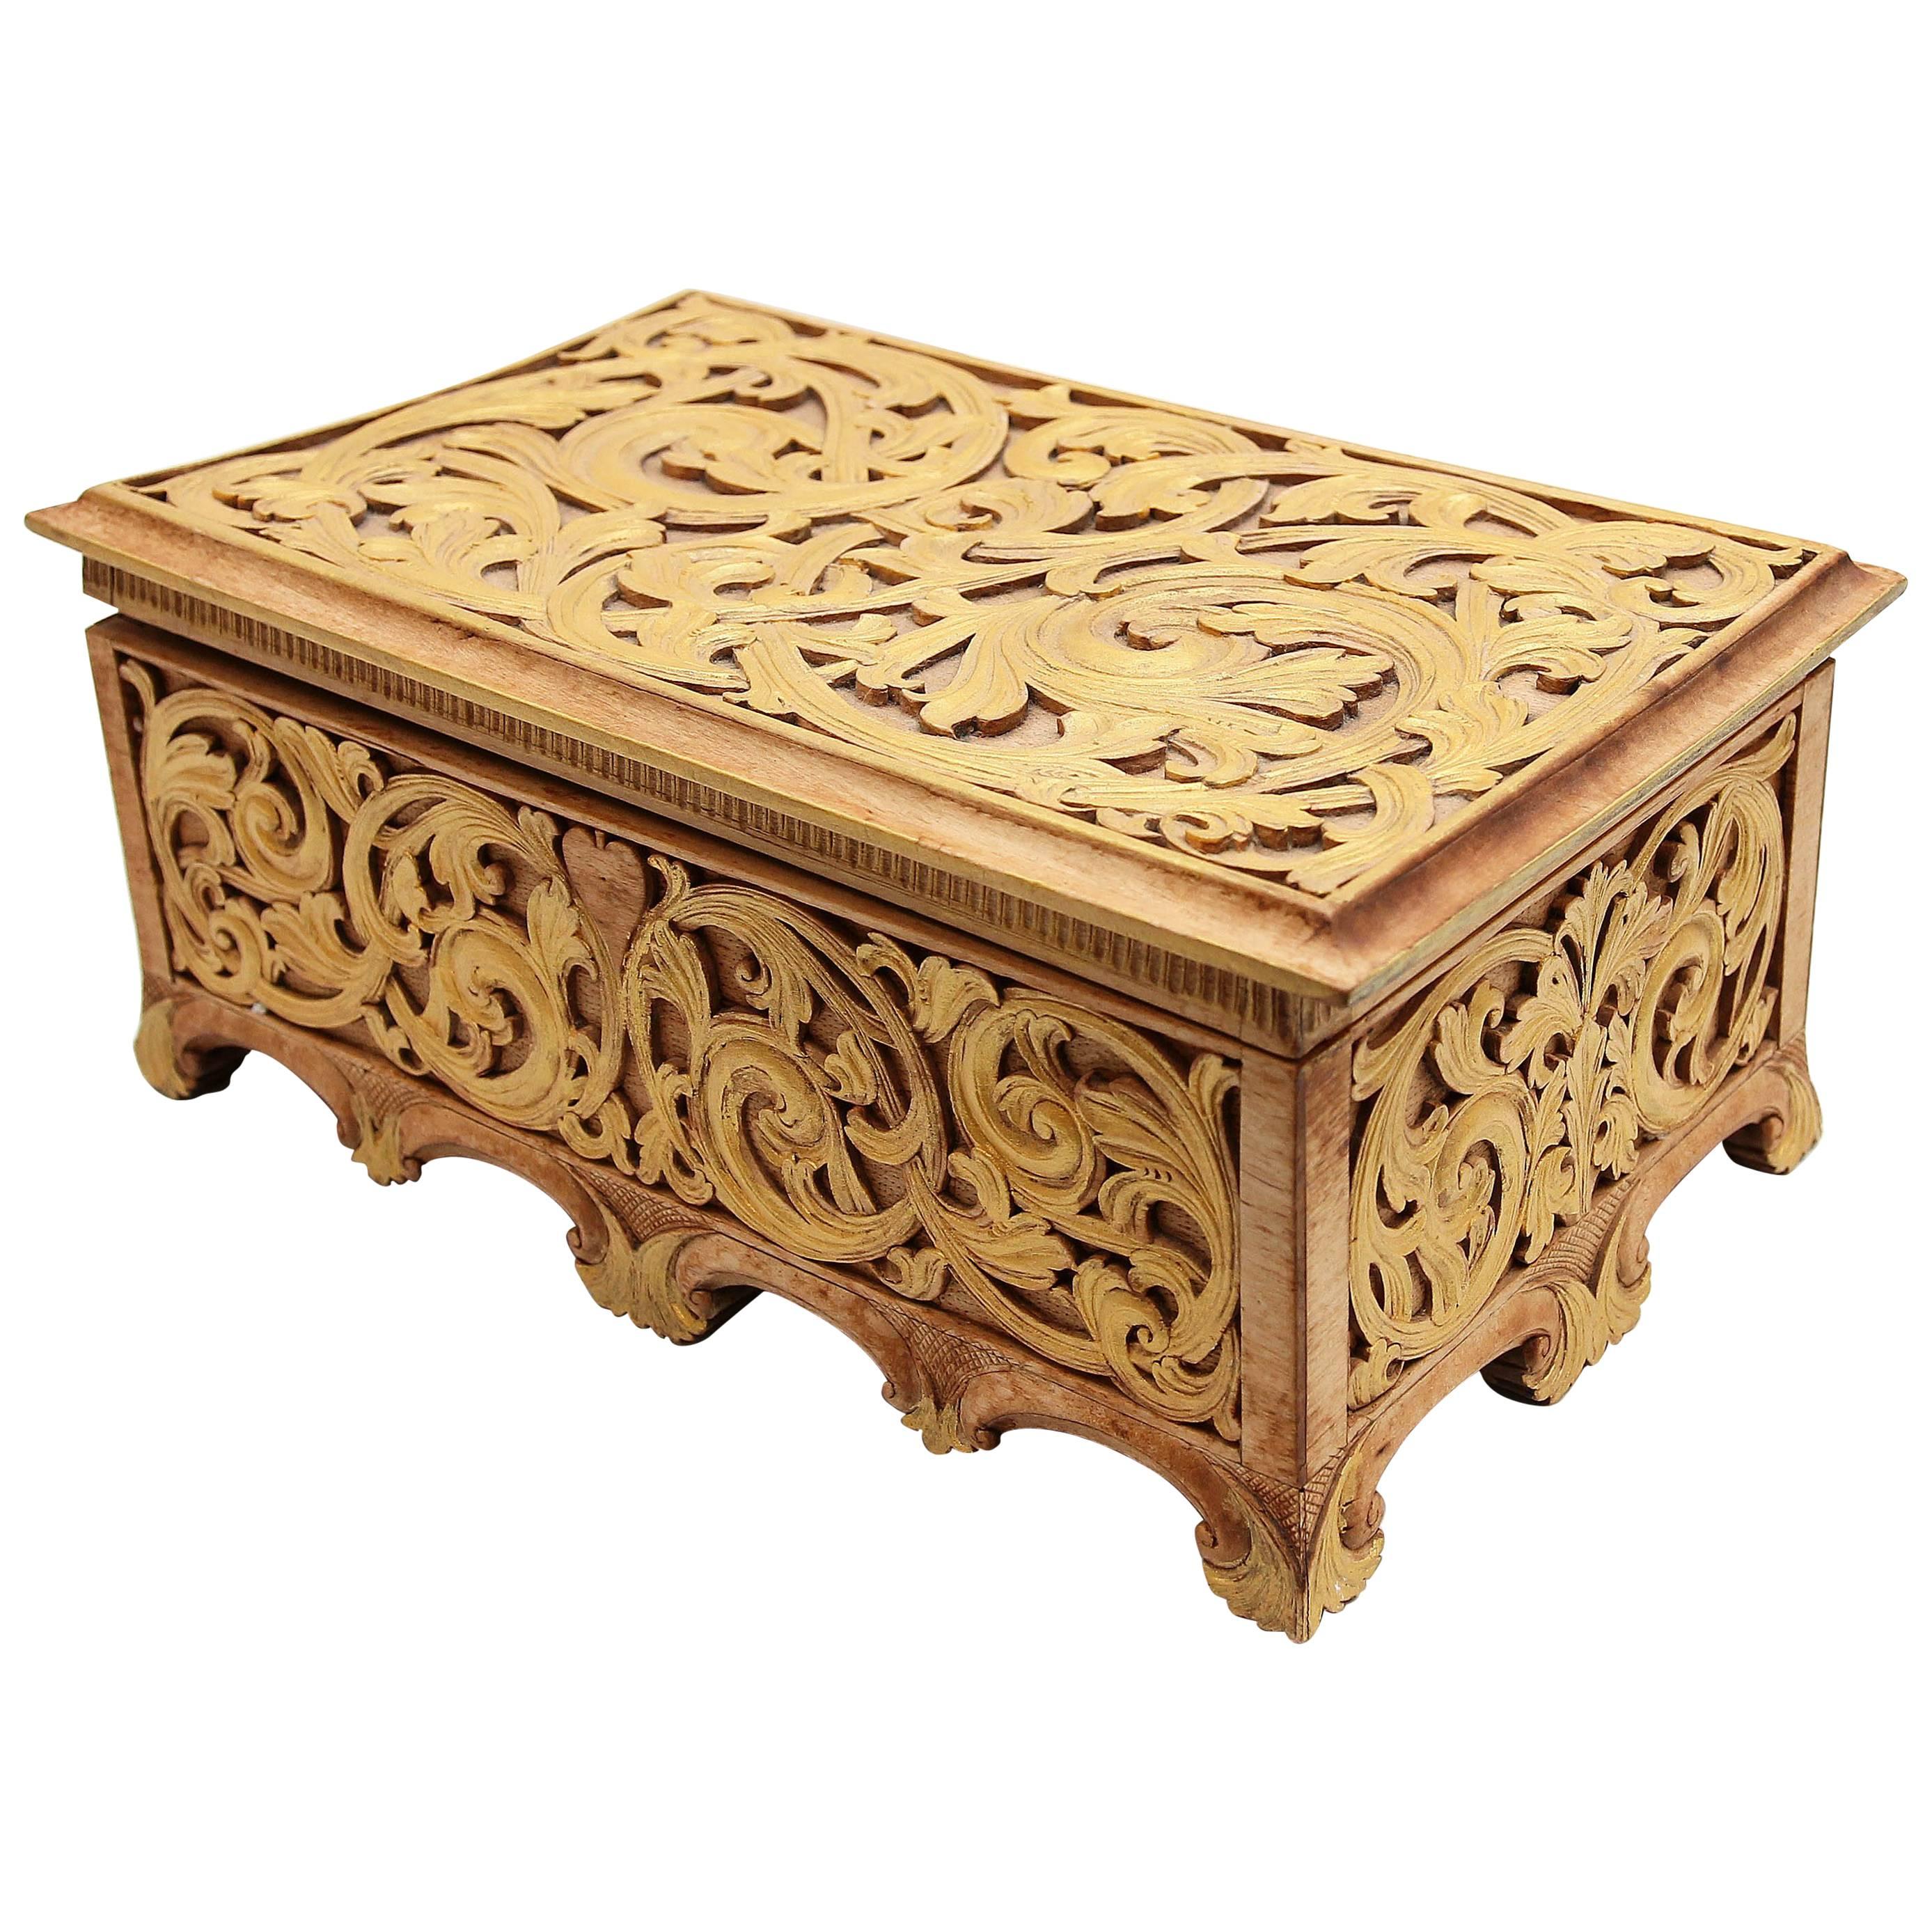 Carved Giltwood Gothic Revival Document Box